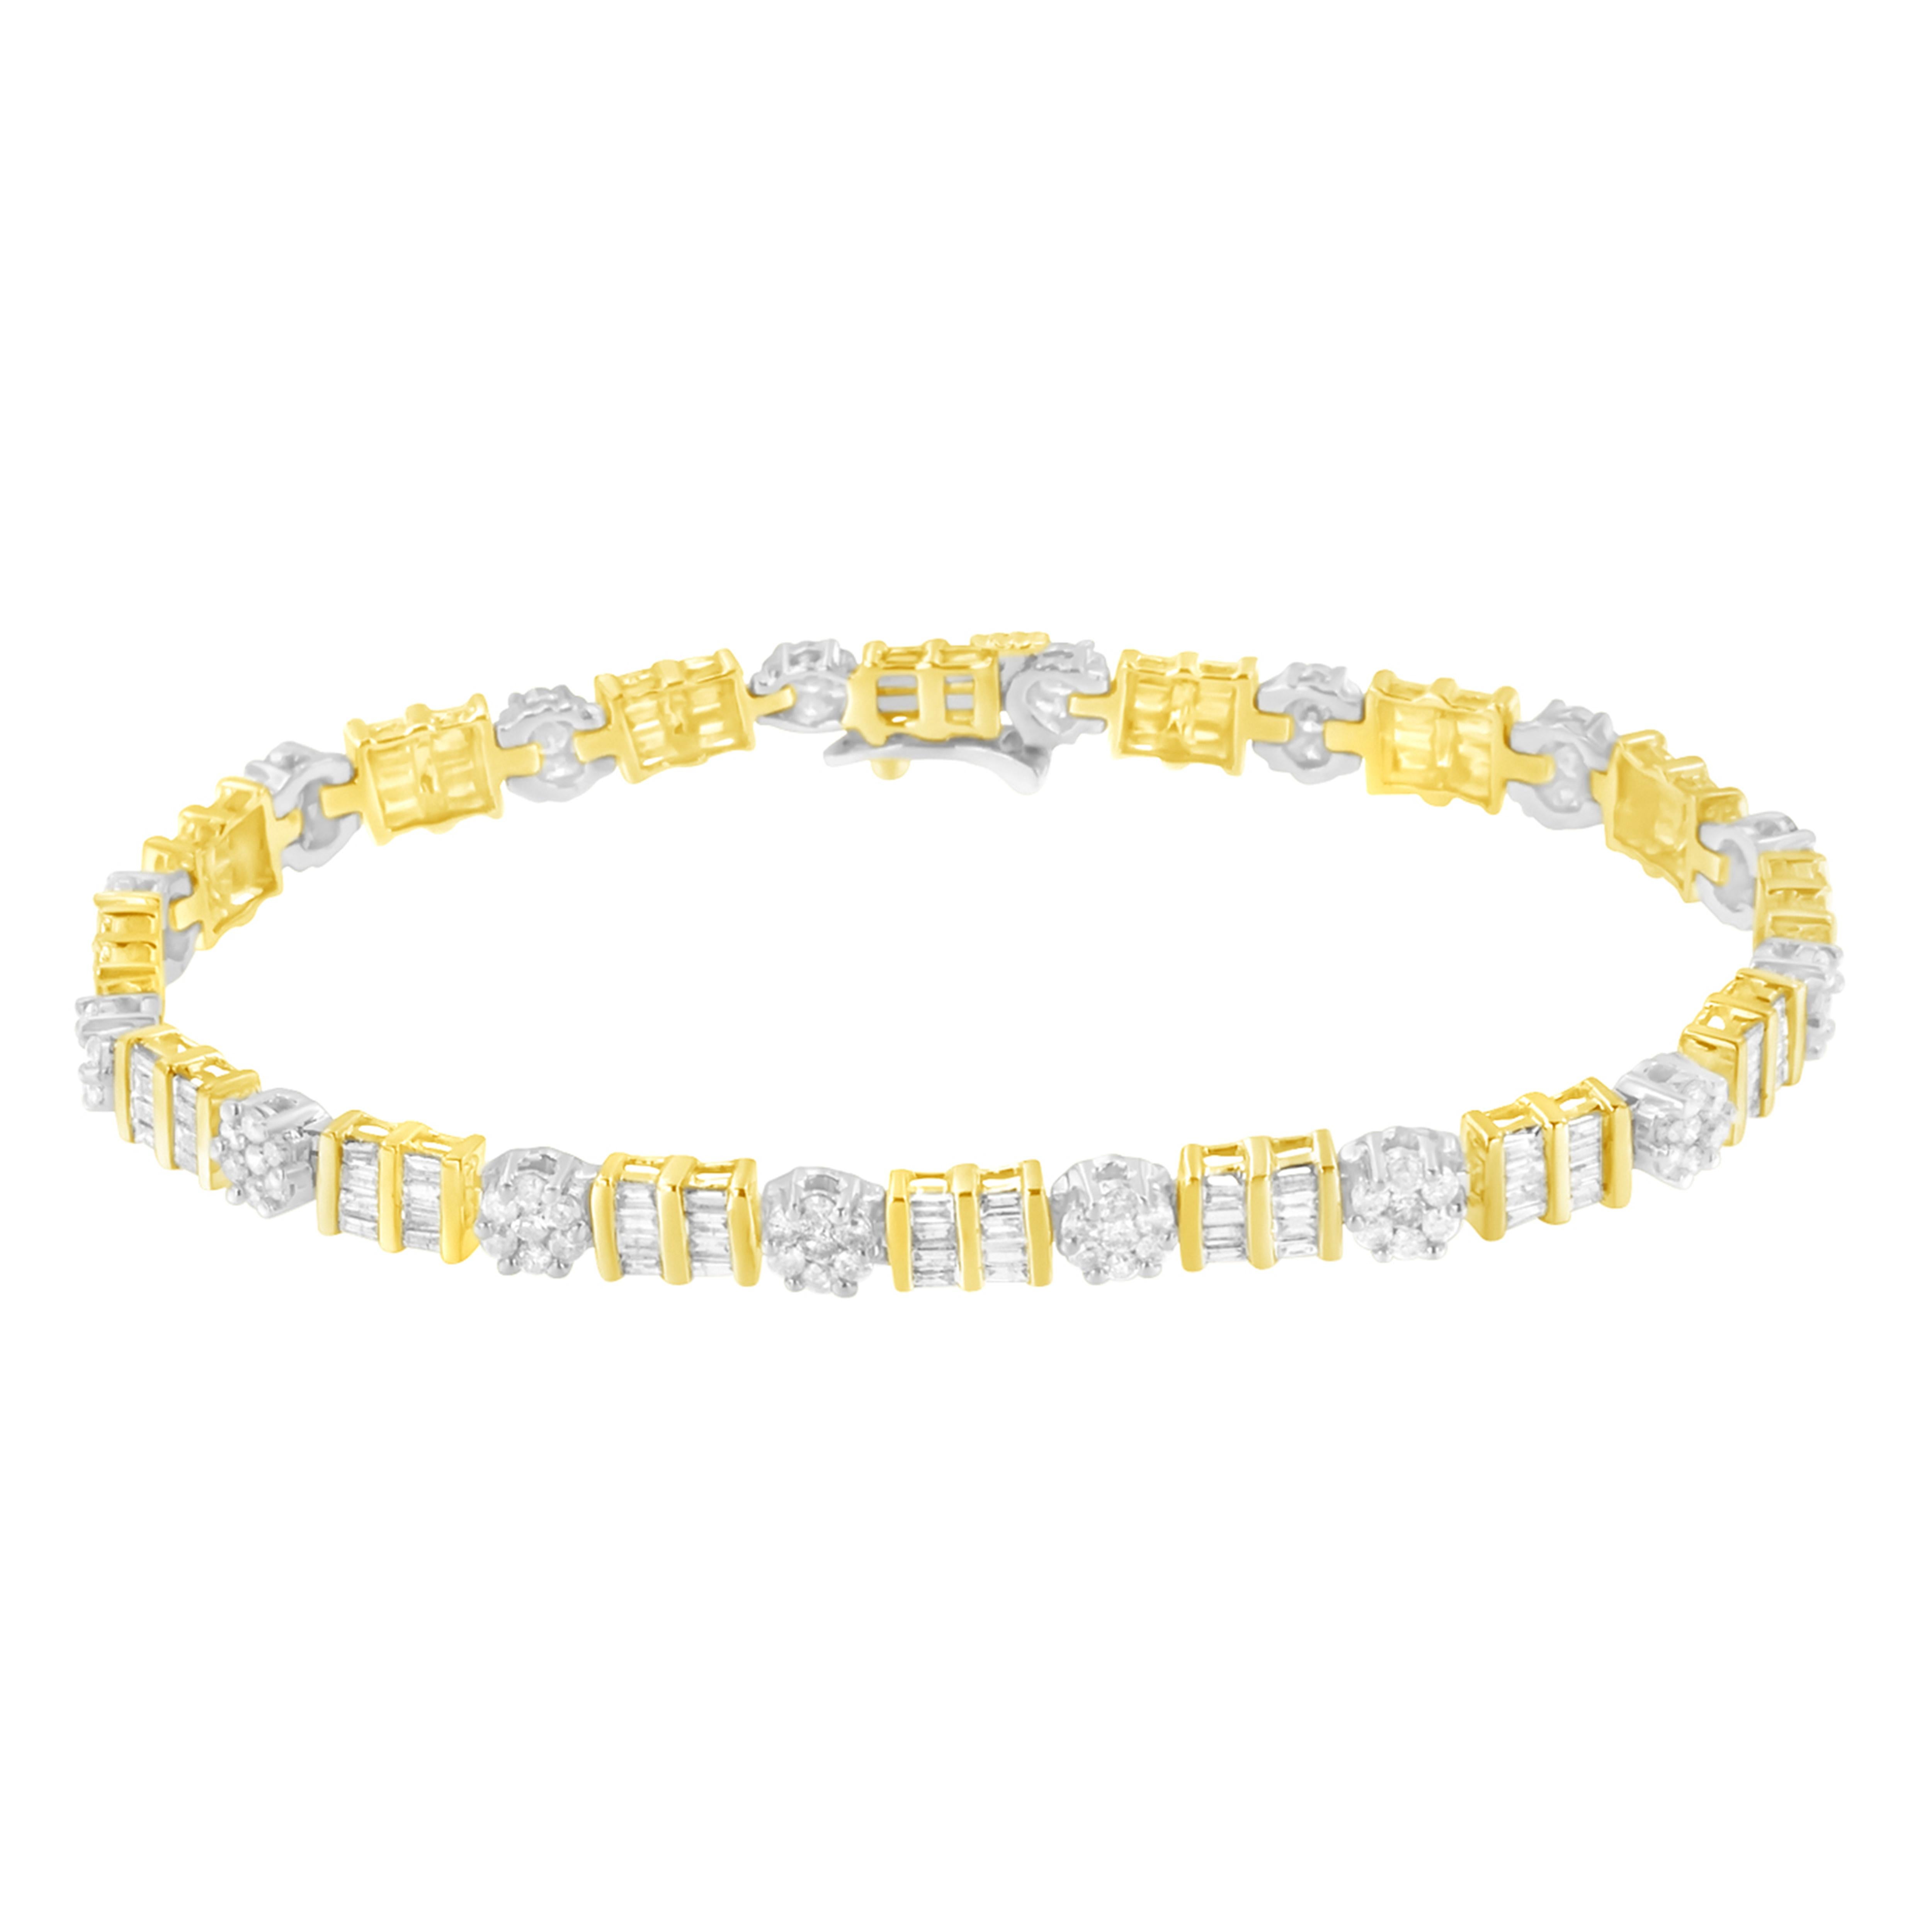 Set in white gold a cluster of sparkling round cut diamonds create a floral link. Alternating with the round diamond links, crafted in yellow gold, two rows of baguette cut diamonds inlay a rectangular shape. This 14k yellow and white gold bracelet